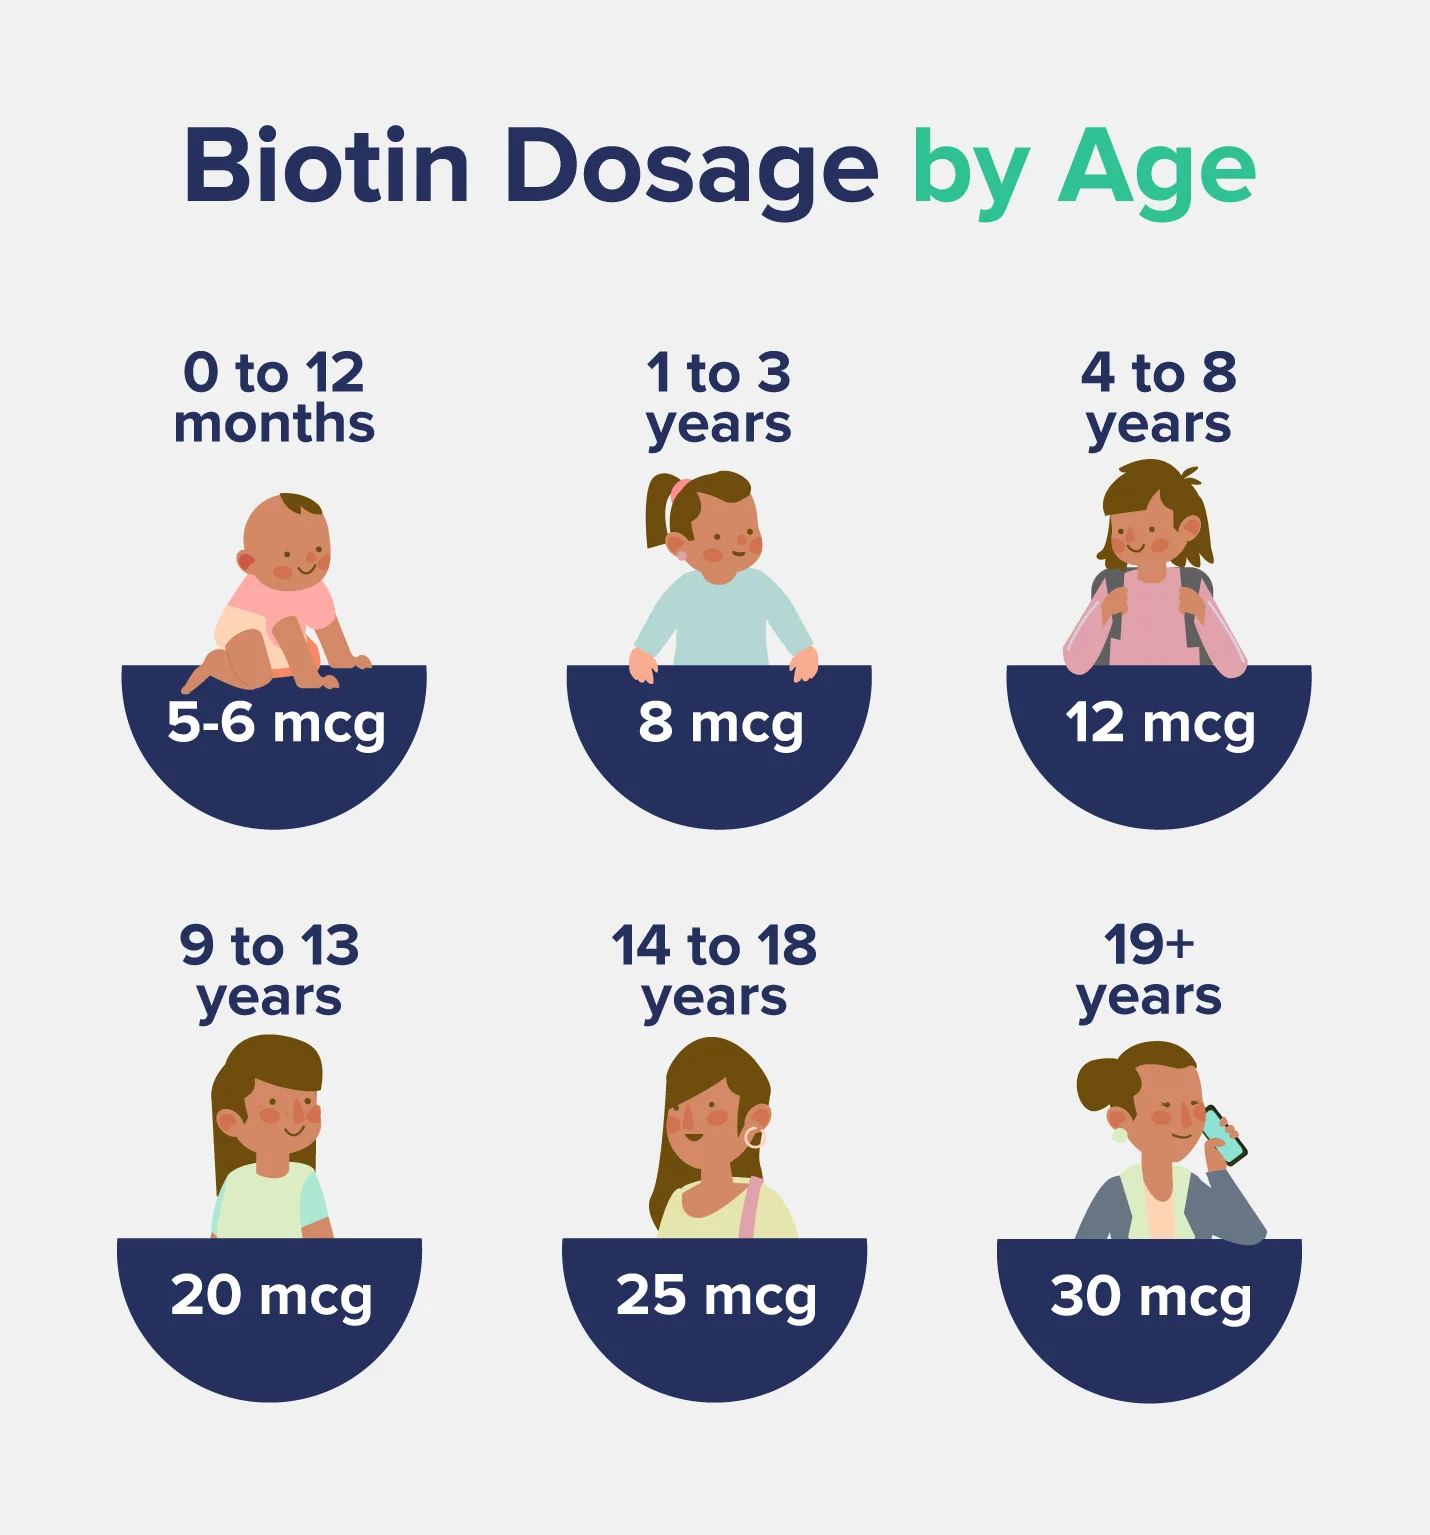 Biotin Dosage by age0 to 12 months - 5-6mcg1 to 3 years - 8 mcg4 to 8 years - 12 mcg9 to 13 years - 20 mcg 14 to 18 years - 25 mcg 19+ years - 30 mcg